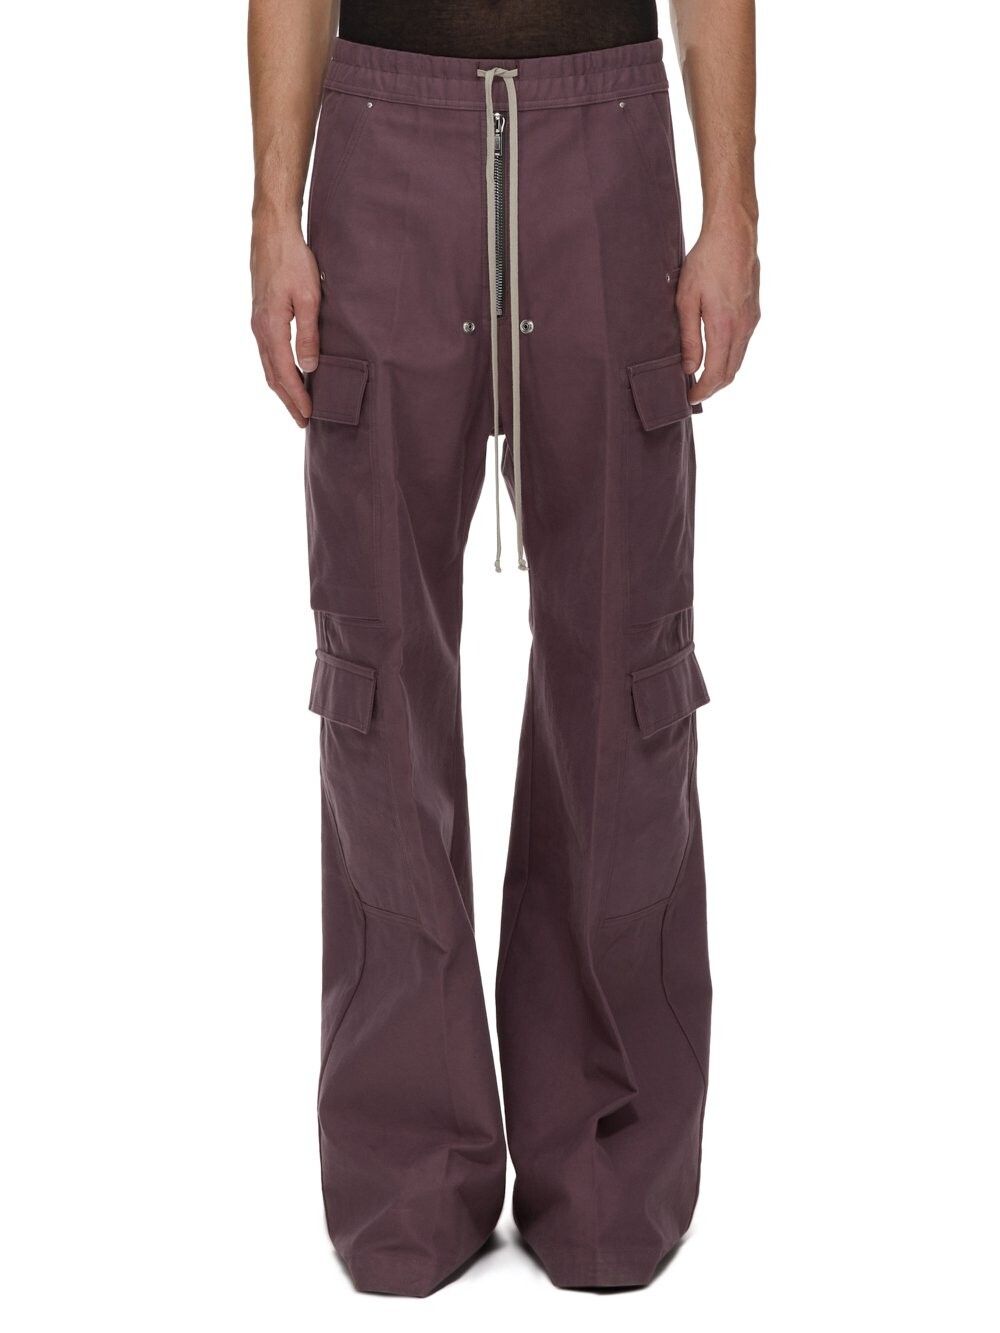 Pre-owned Rick Owens Pants Jeans Trousers Cargo Workwear Leather Waxed In Plum